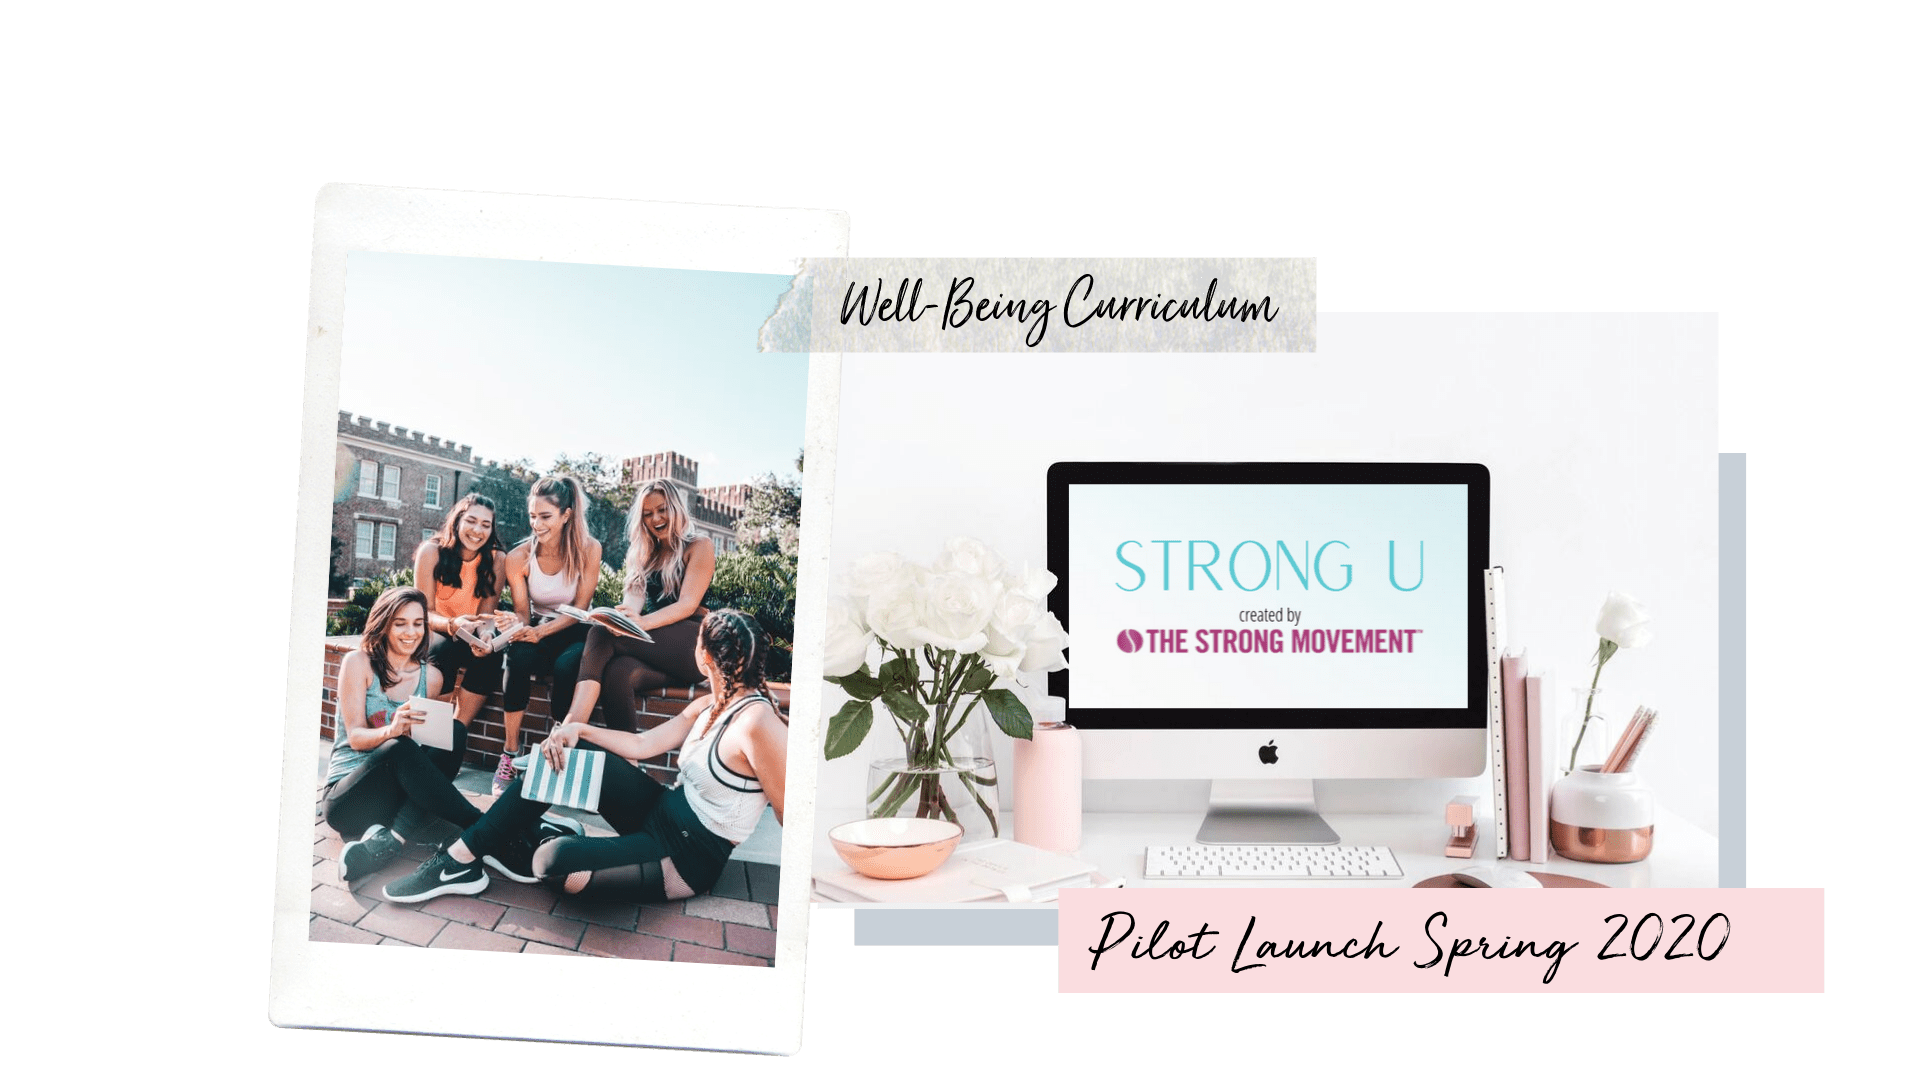 The Strong Movement StrongU Sorority Well-Being Curriculum